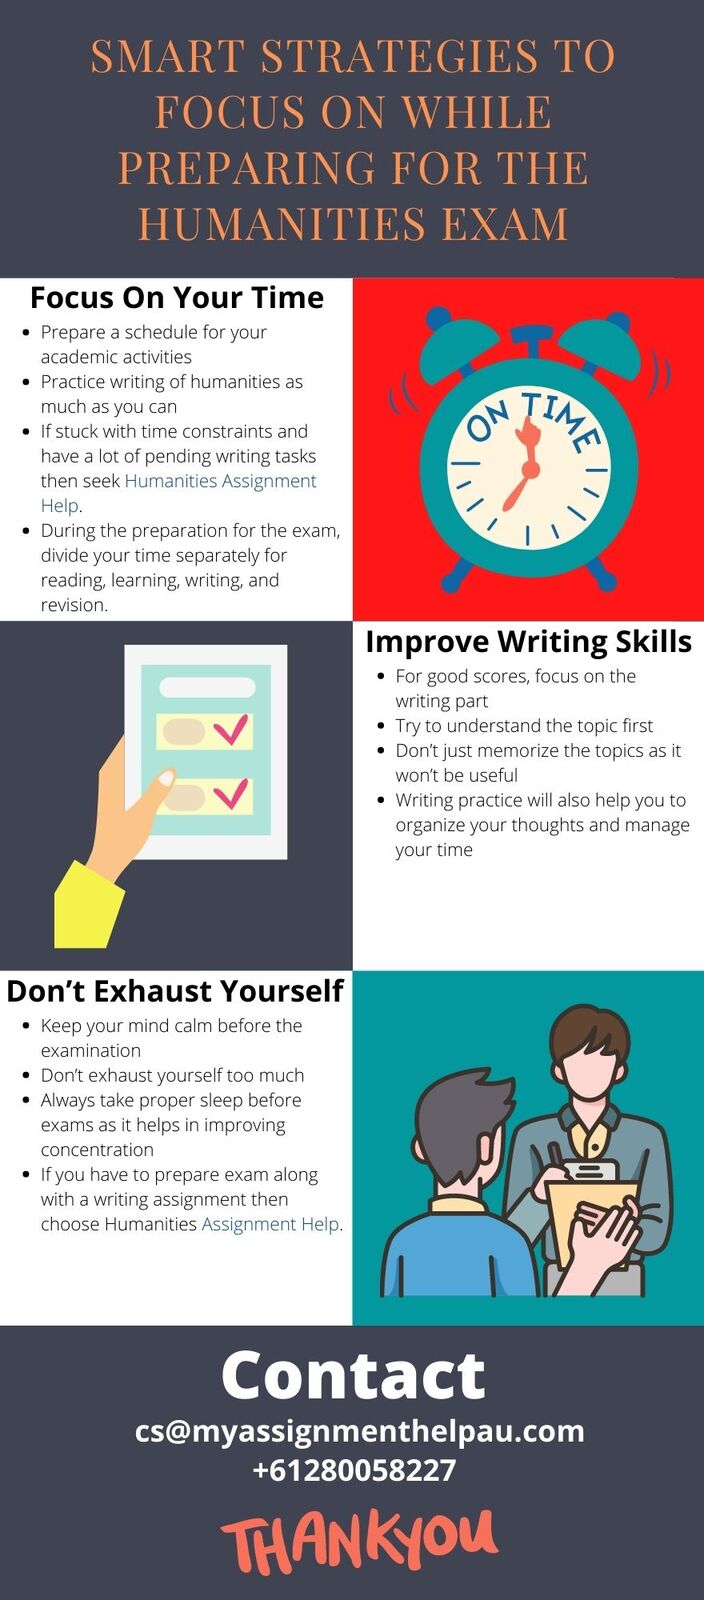 Smart Strategies to Focus On While Preparing For the Humanities Exam